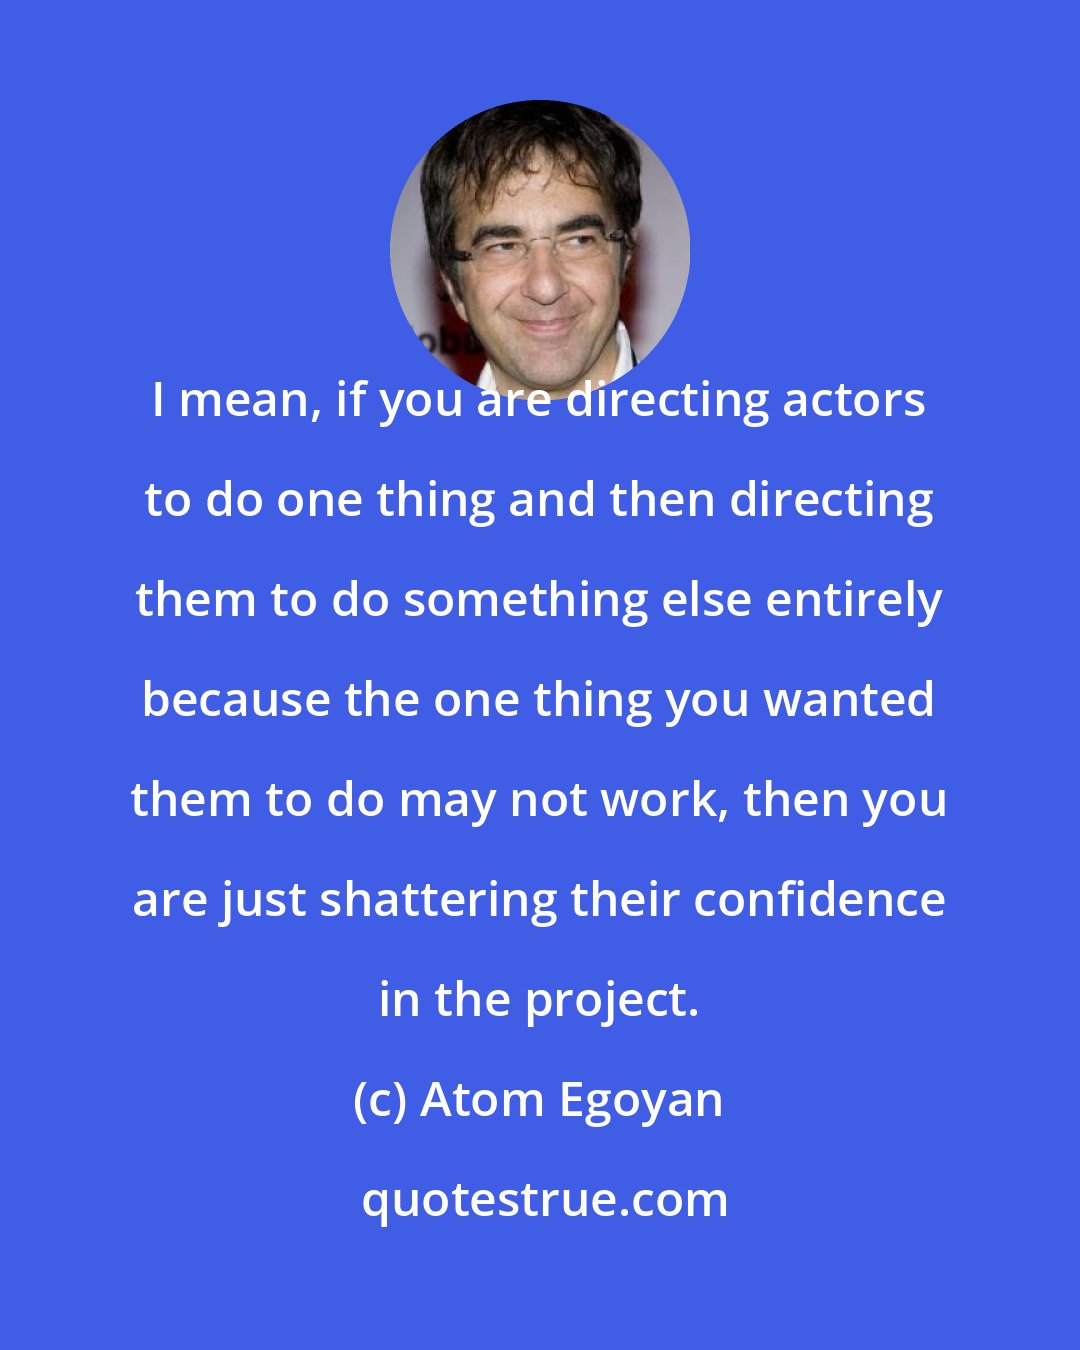 Atom Egoyan: I mean, if you are directing actors to do one thing and then directing them to do something else entirely because the one thing you wanted them to do may not work, then you are just shattering their confidence in the project.